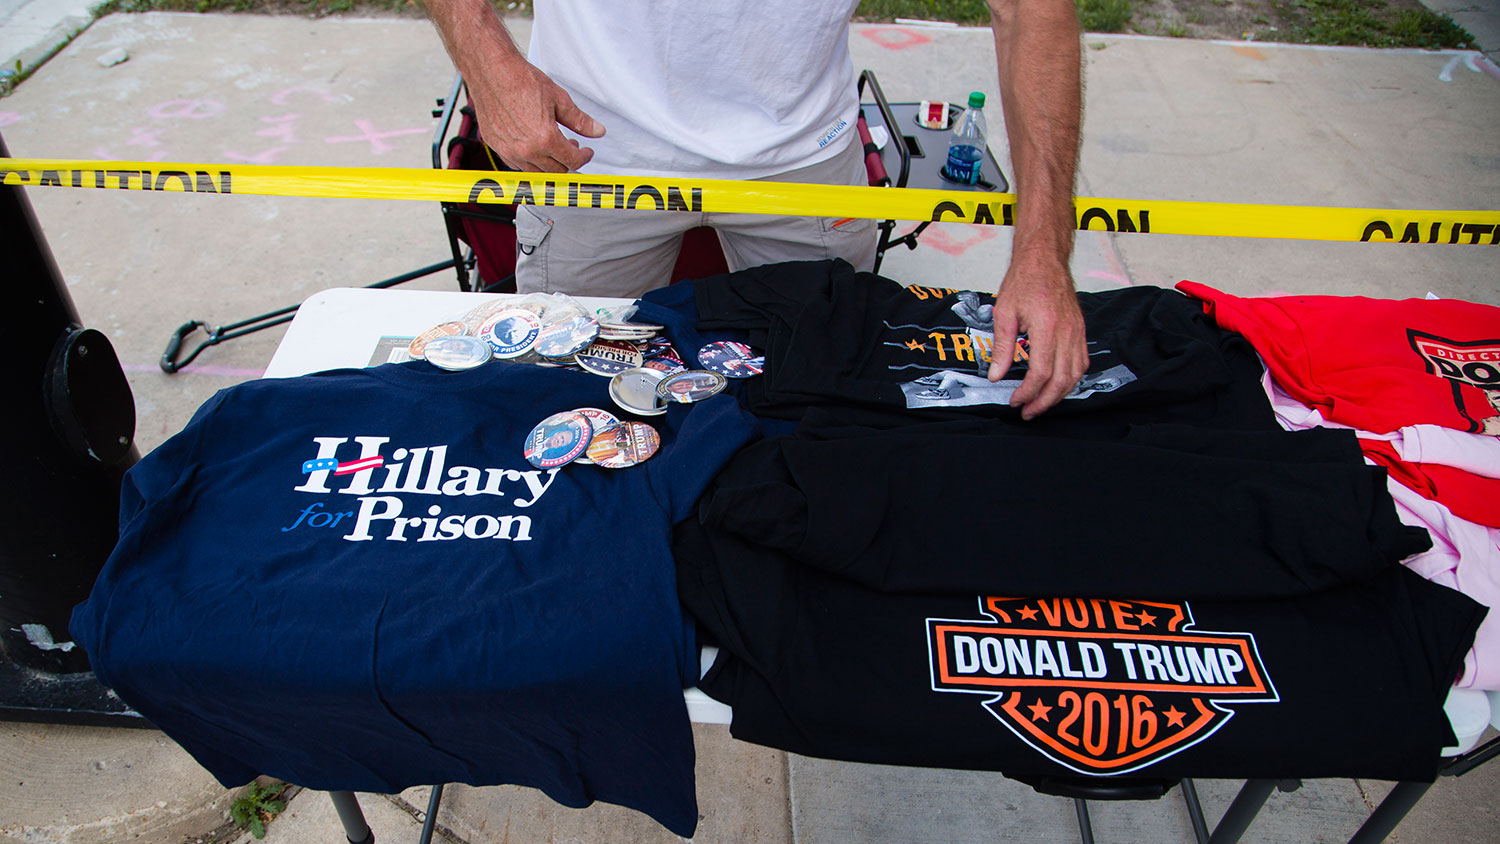 A vendor is seen selling pro-Donald Trump shirts and buttons outside a rally in Green Bay, Wisconsin, on Aug. 5, 2016.
